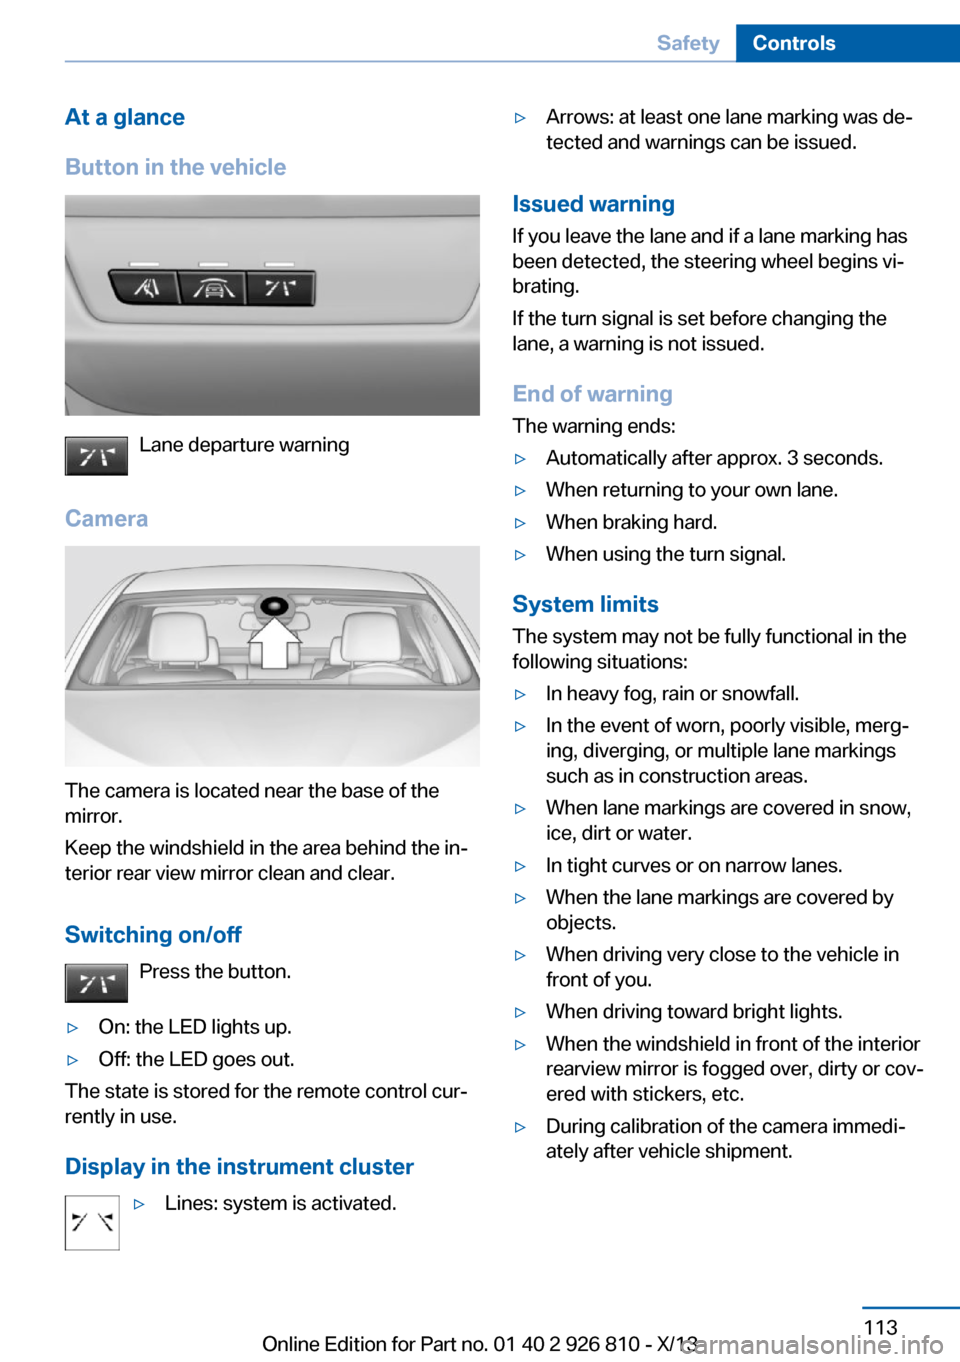 BMW 3 SERIES SEDAN 2013 F30 Owners Guide At a glance
Button in the vehicle
Lane departure warning
Camera
The camera is located near the base of the
mirror.
Keep the windshield in the area behind the in‐
terior rear view mirror clean and cl